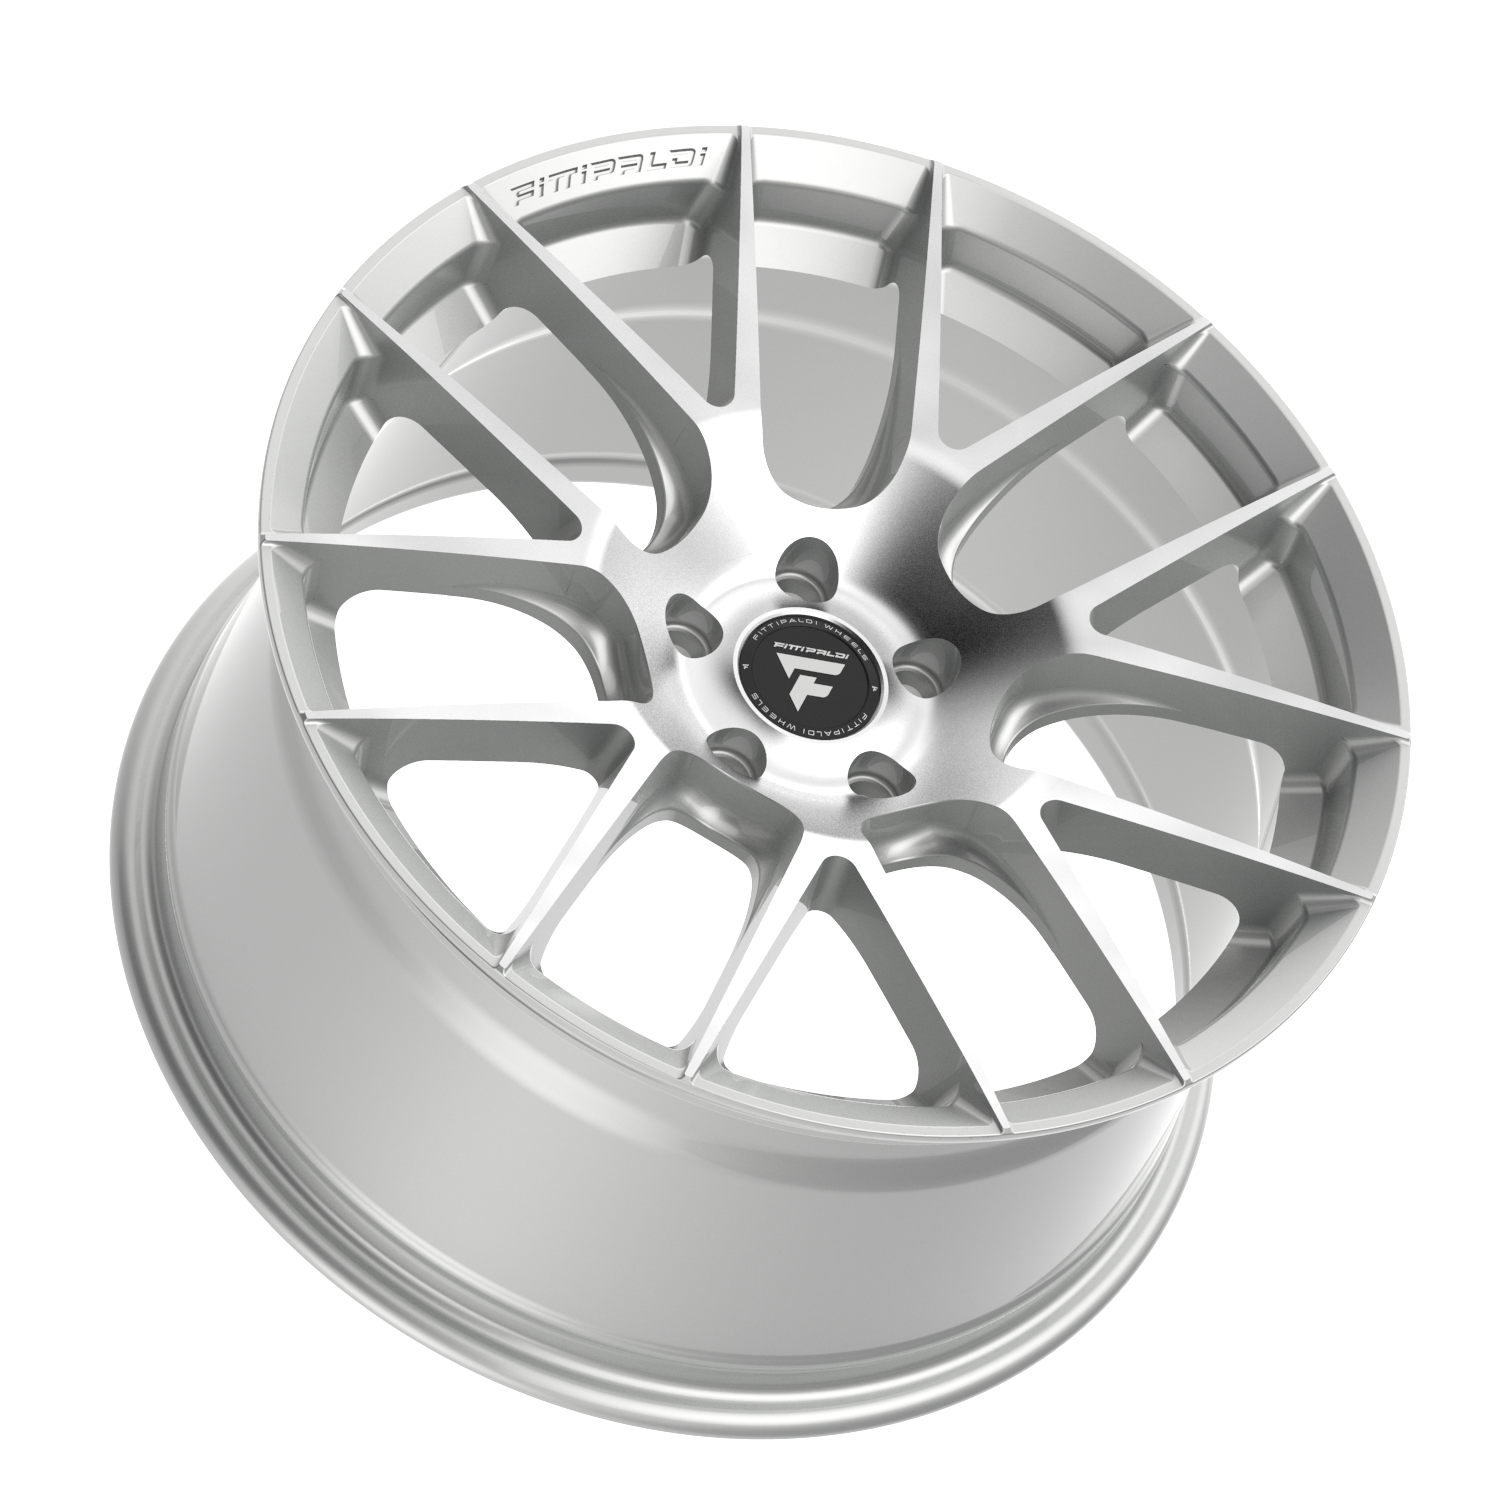 FITTIPALDI 360BS 19X9.5 +38 5X120 Brushed Silver